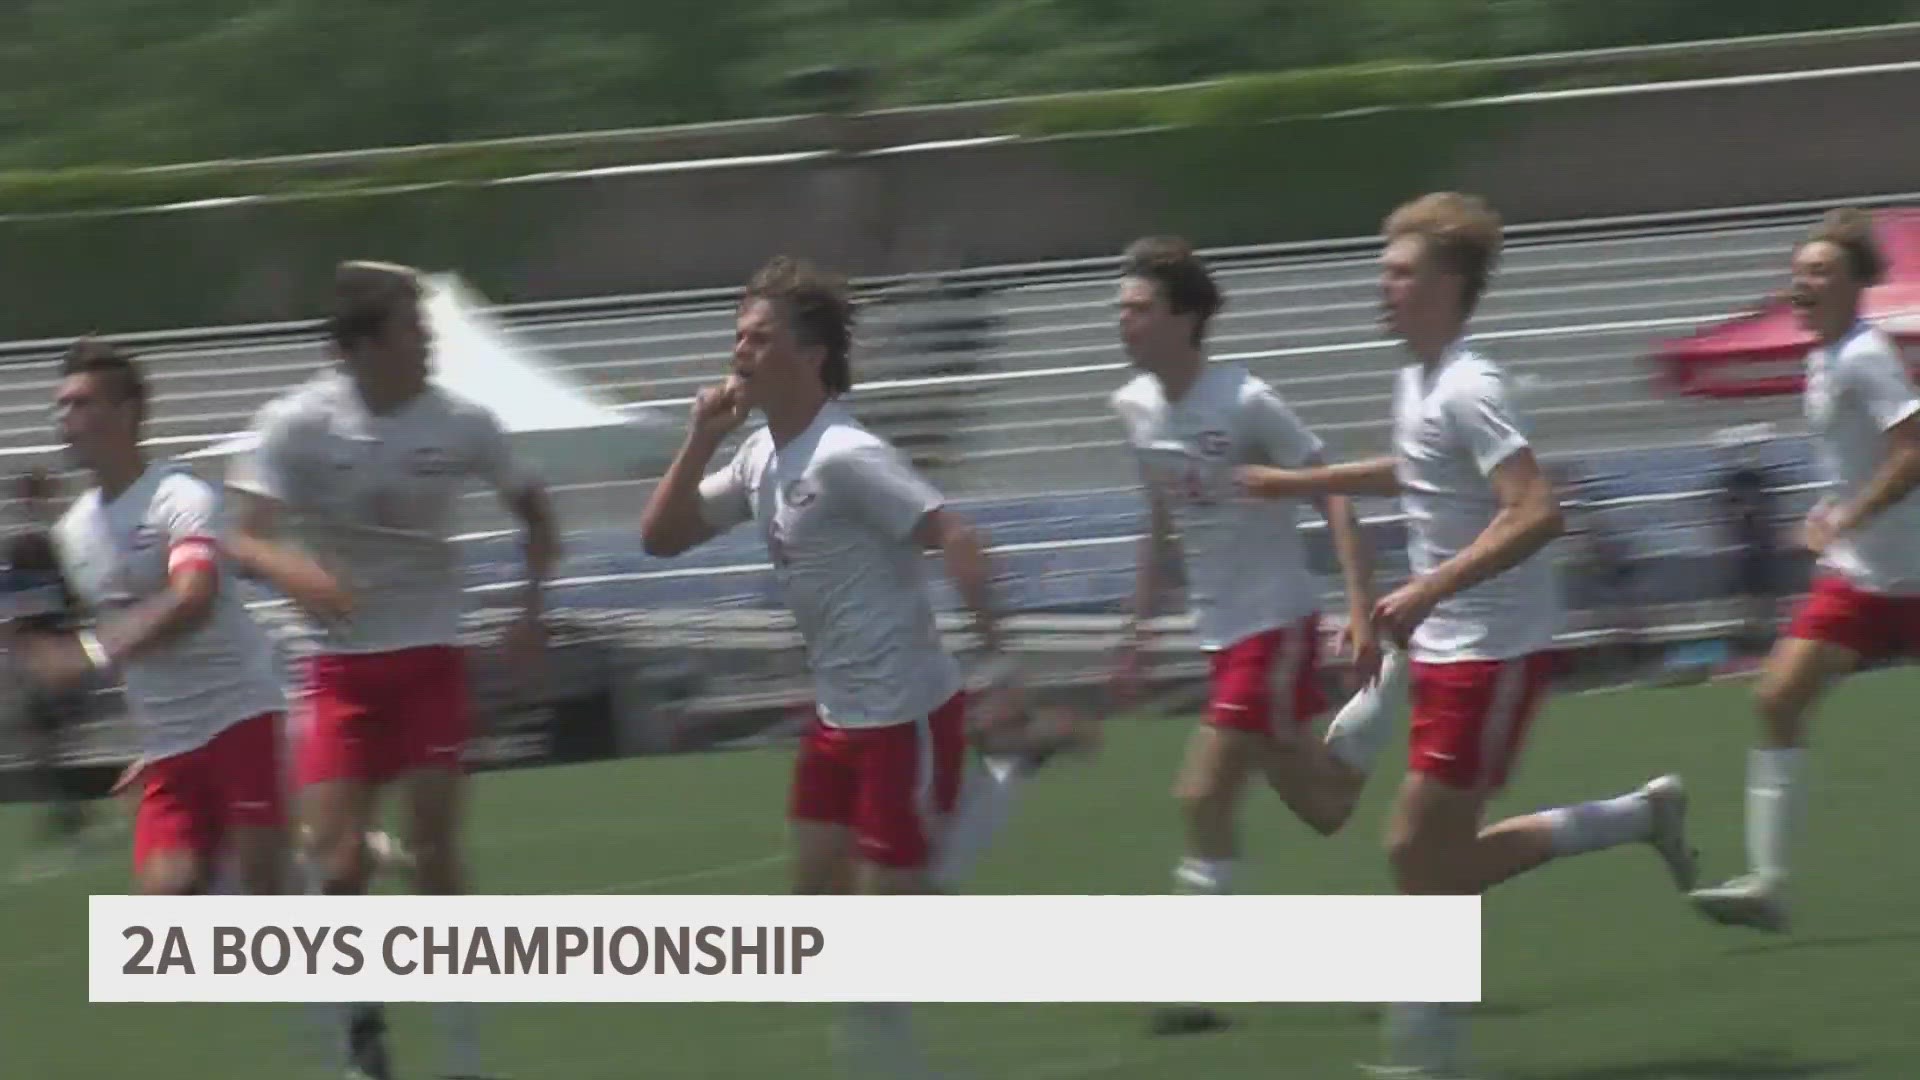 No. 3 Gilbert bested No. 1 Assumption 3-2 for their first ever championship title.